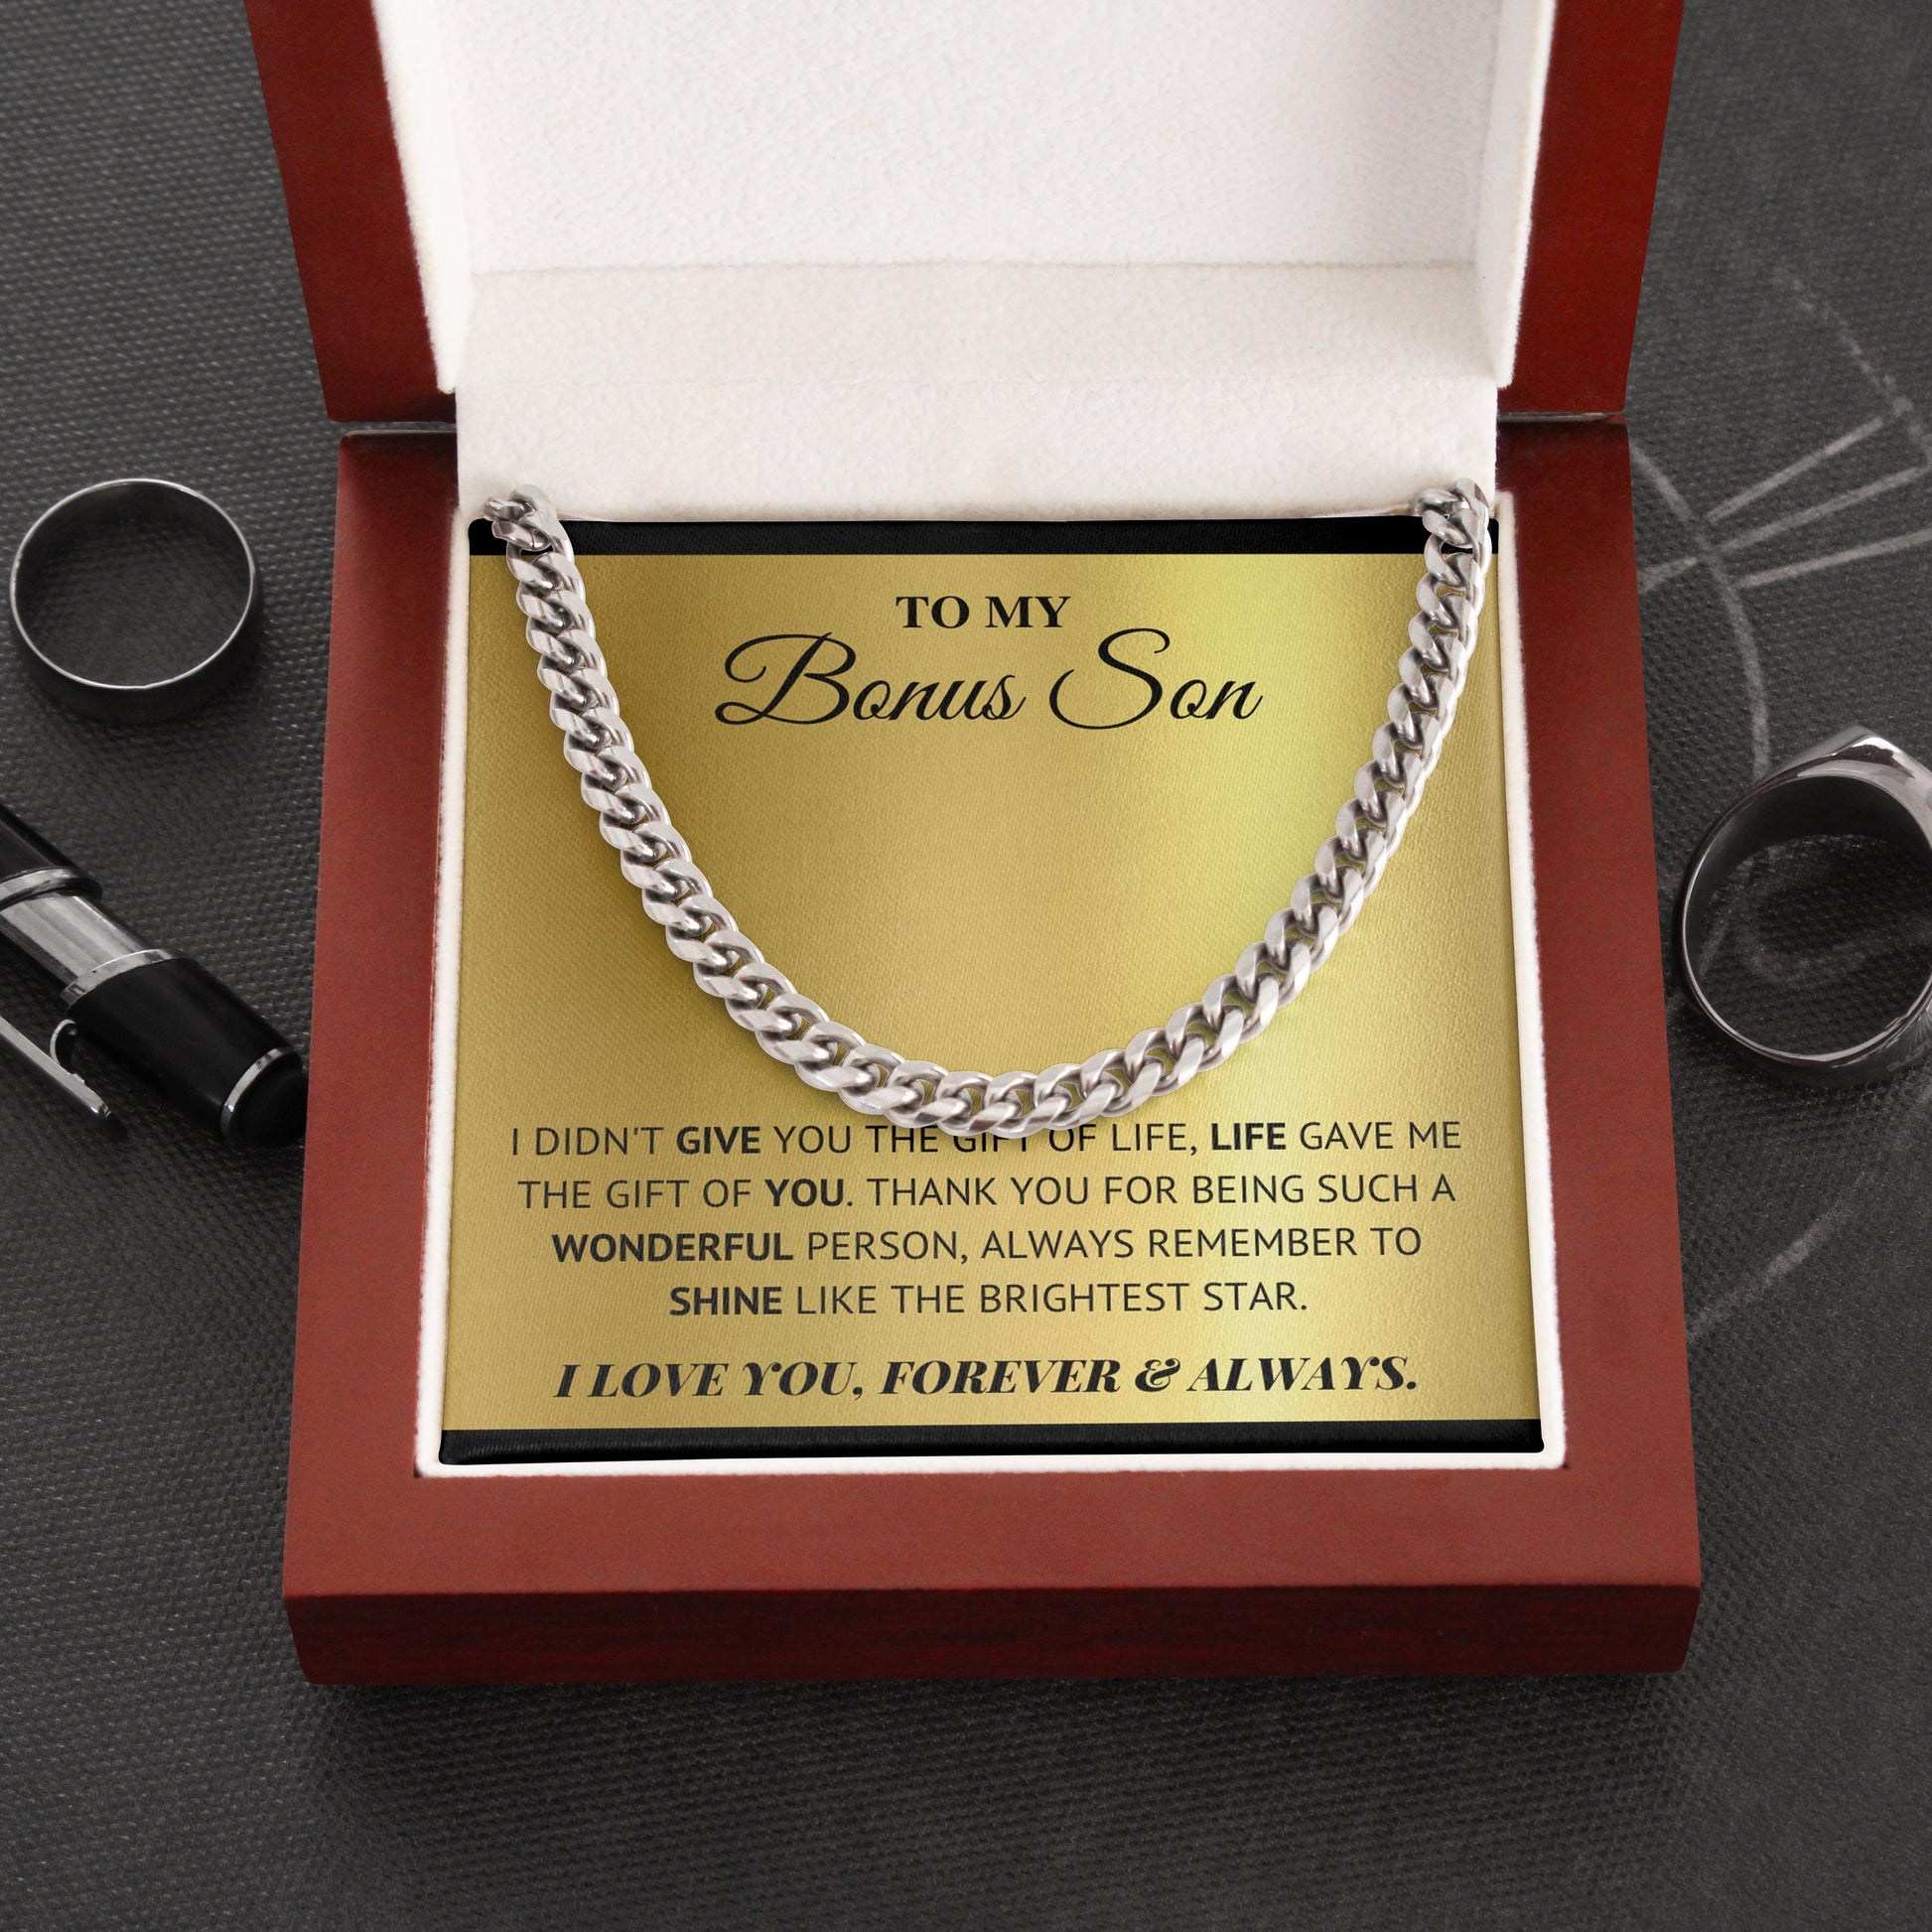 Jewelry gifts Bonus Son -Wonderful Person - Cuban Link Chain - Belesmé - Memorable Jewelry Gifts 